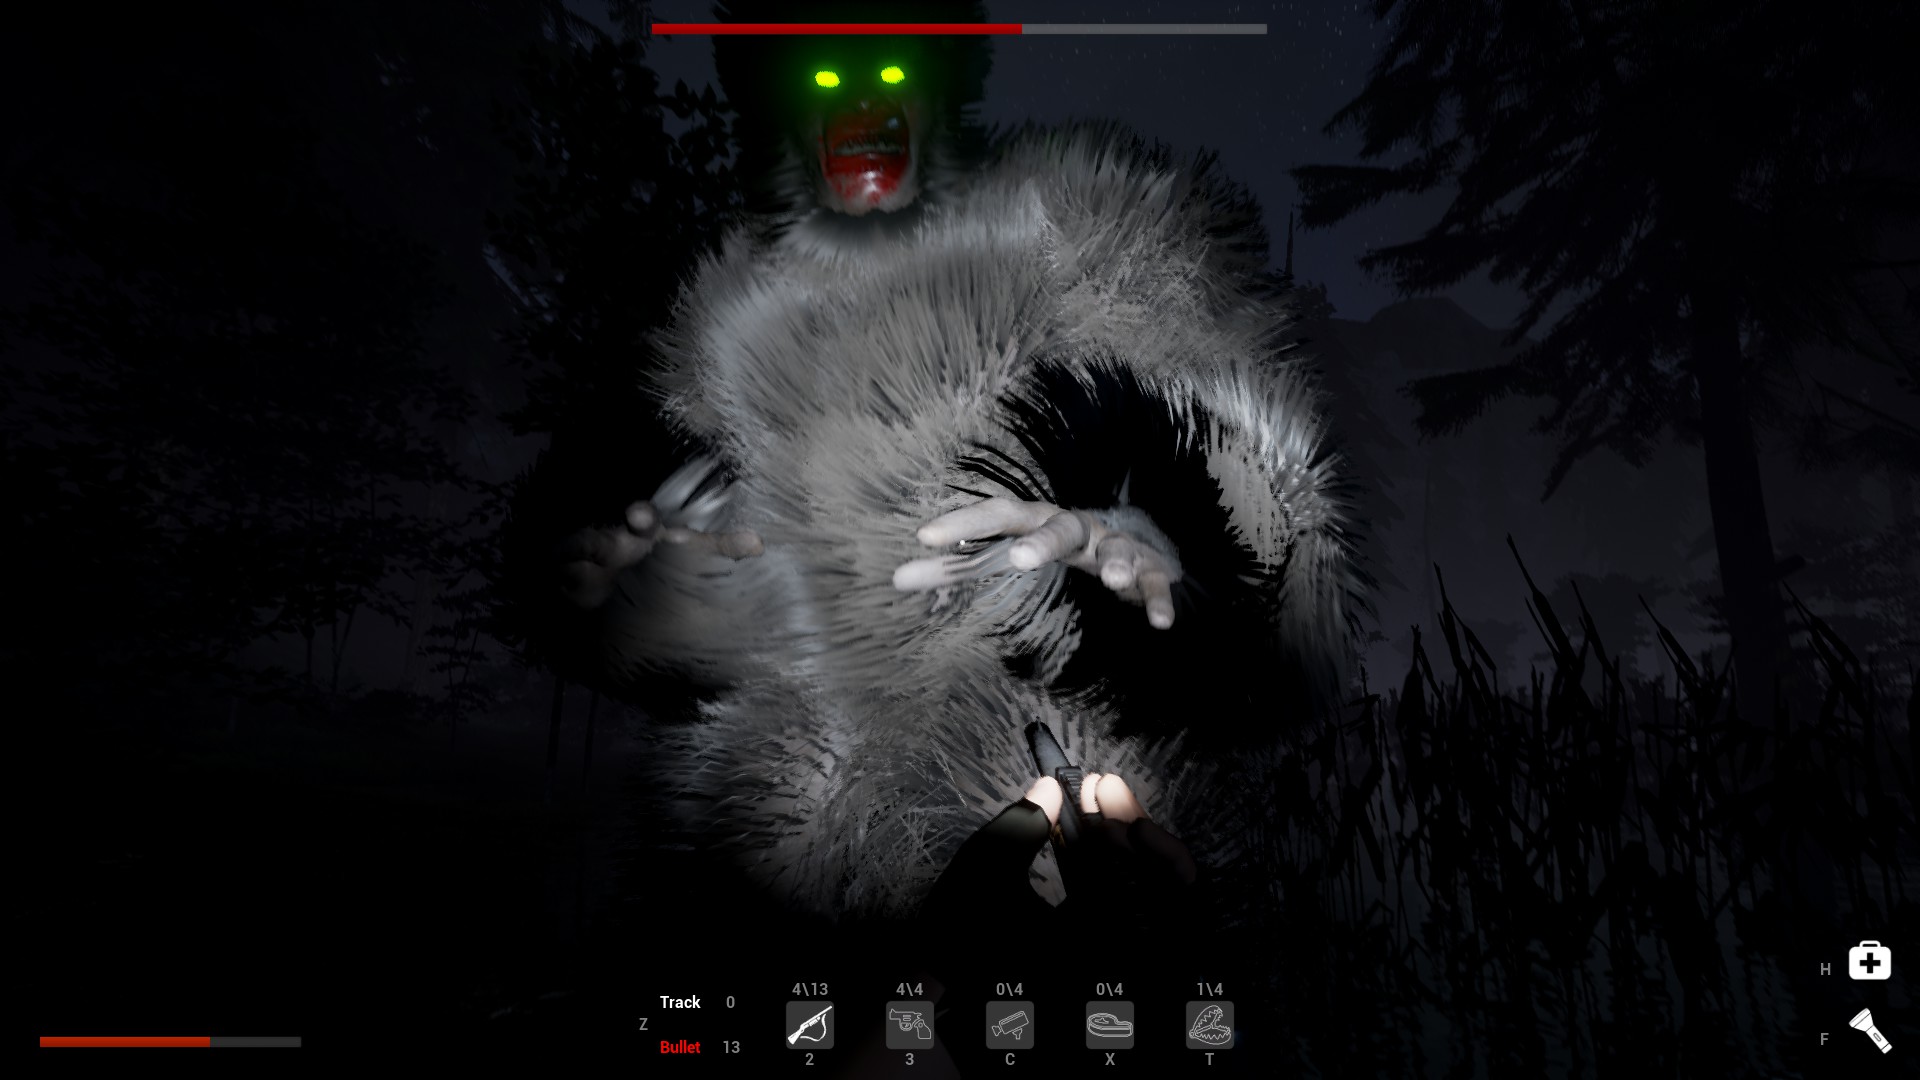 finding bigfoot game from steam